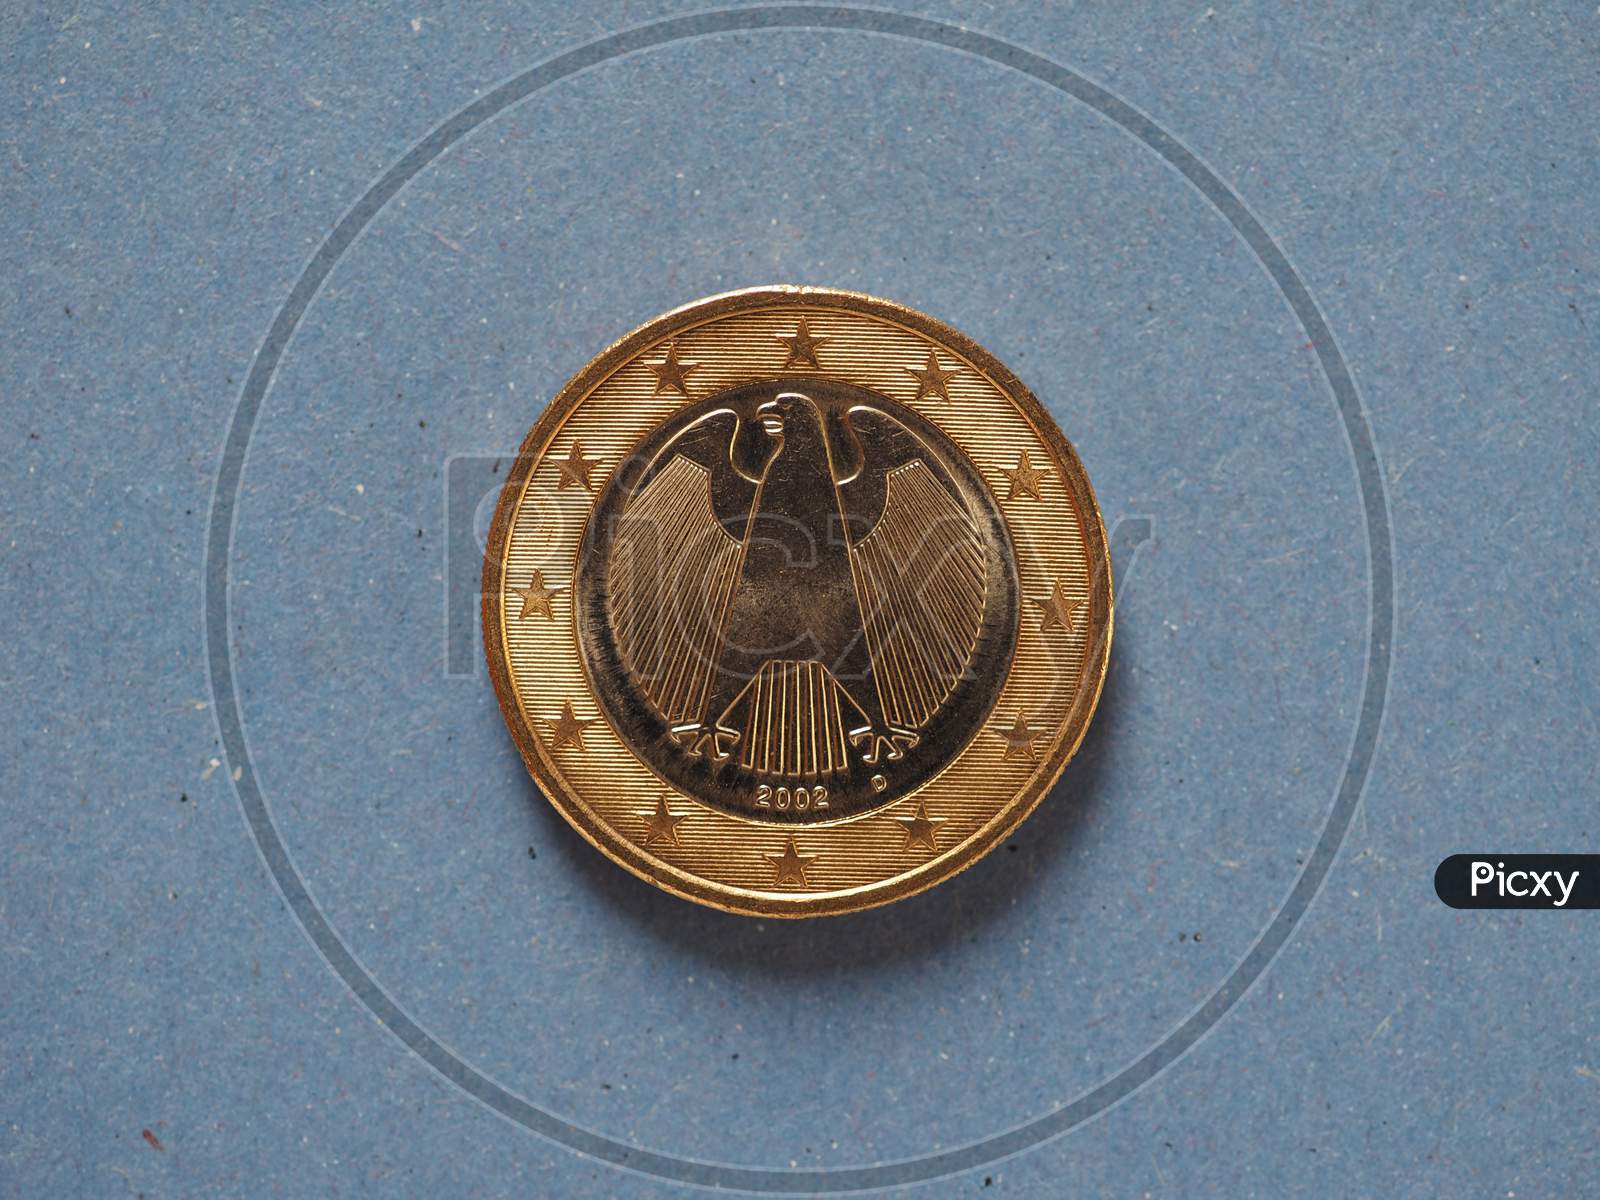 1 Euro Coin, European Union, Germany Over Blue